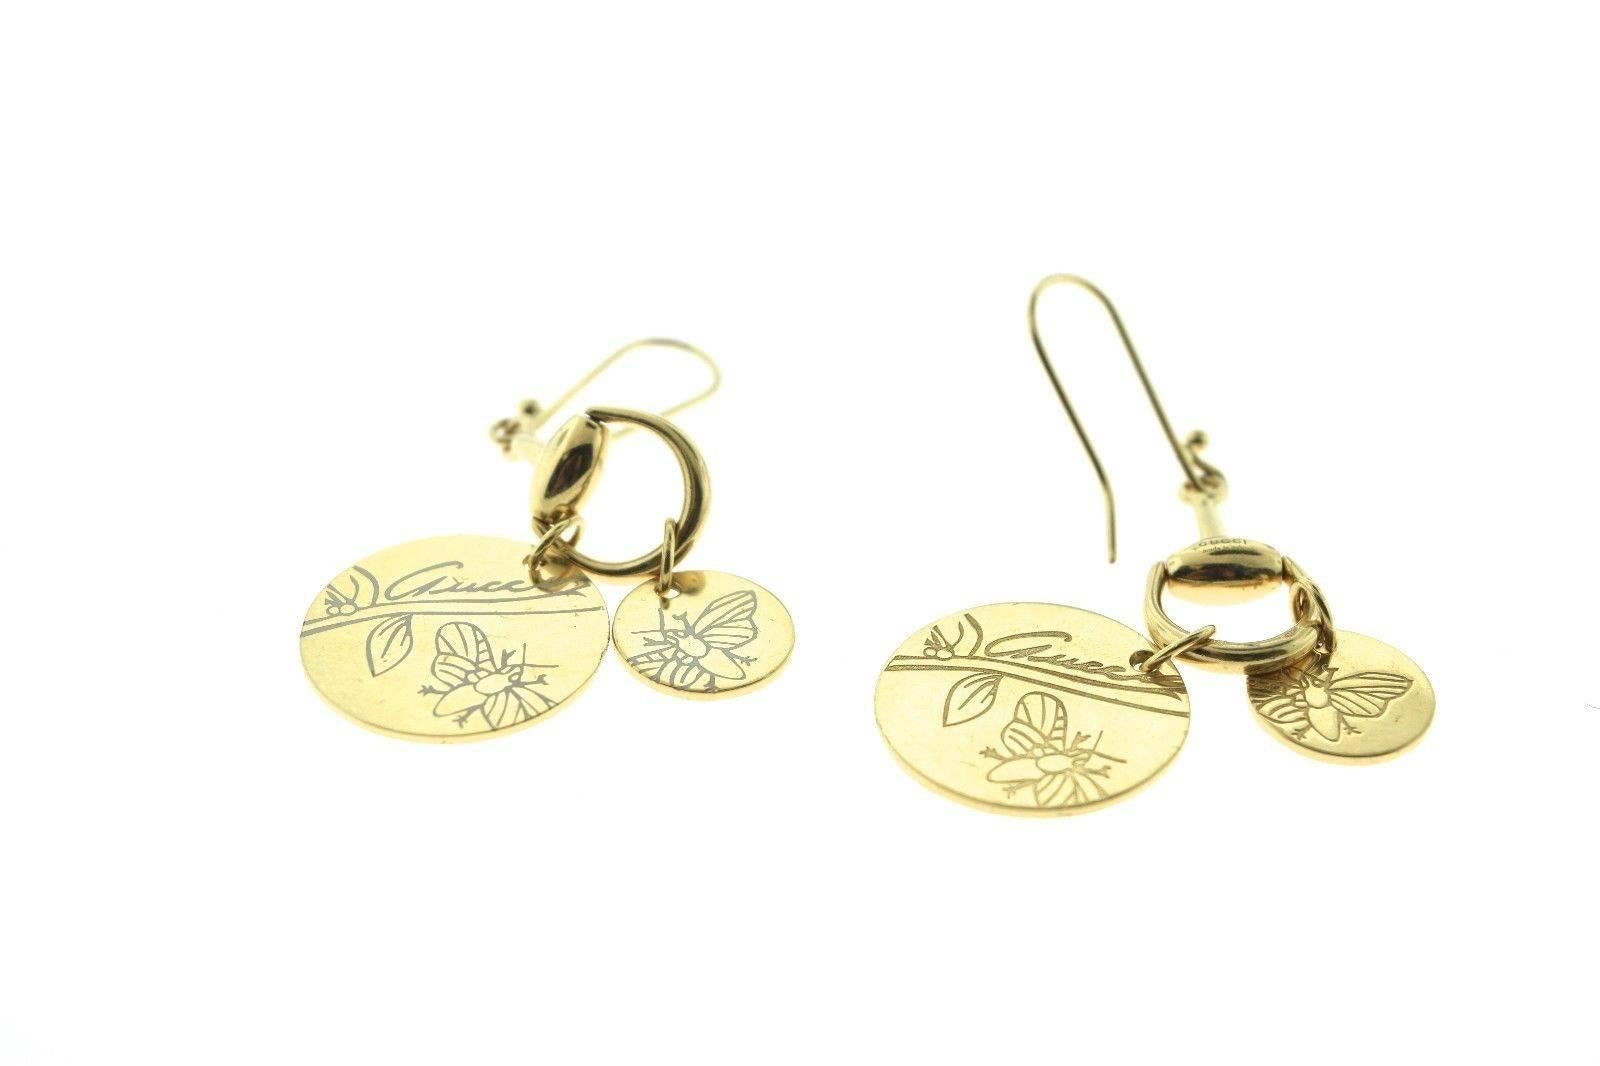 About the Item:
Fabulous Horse-bit charm necklace, bracelet, and earrings 3 piece set made and signed by Gucci. Signature Gucci 18K yellow gold link 3 piece set each with round charms, beautifully engraved with butterflies and Irises from the